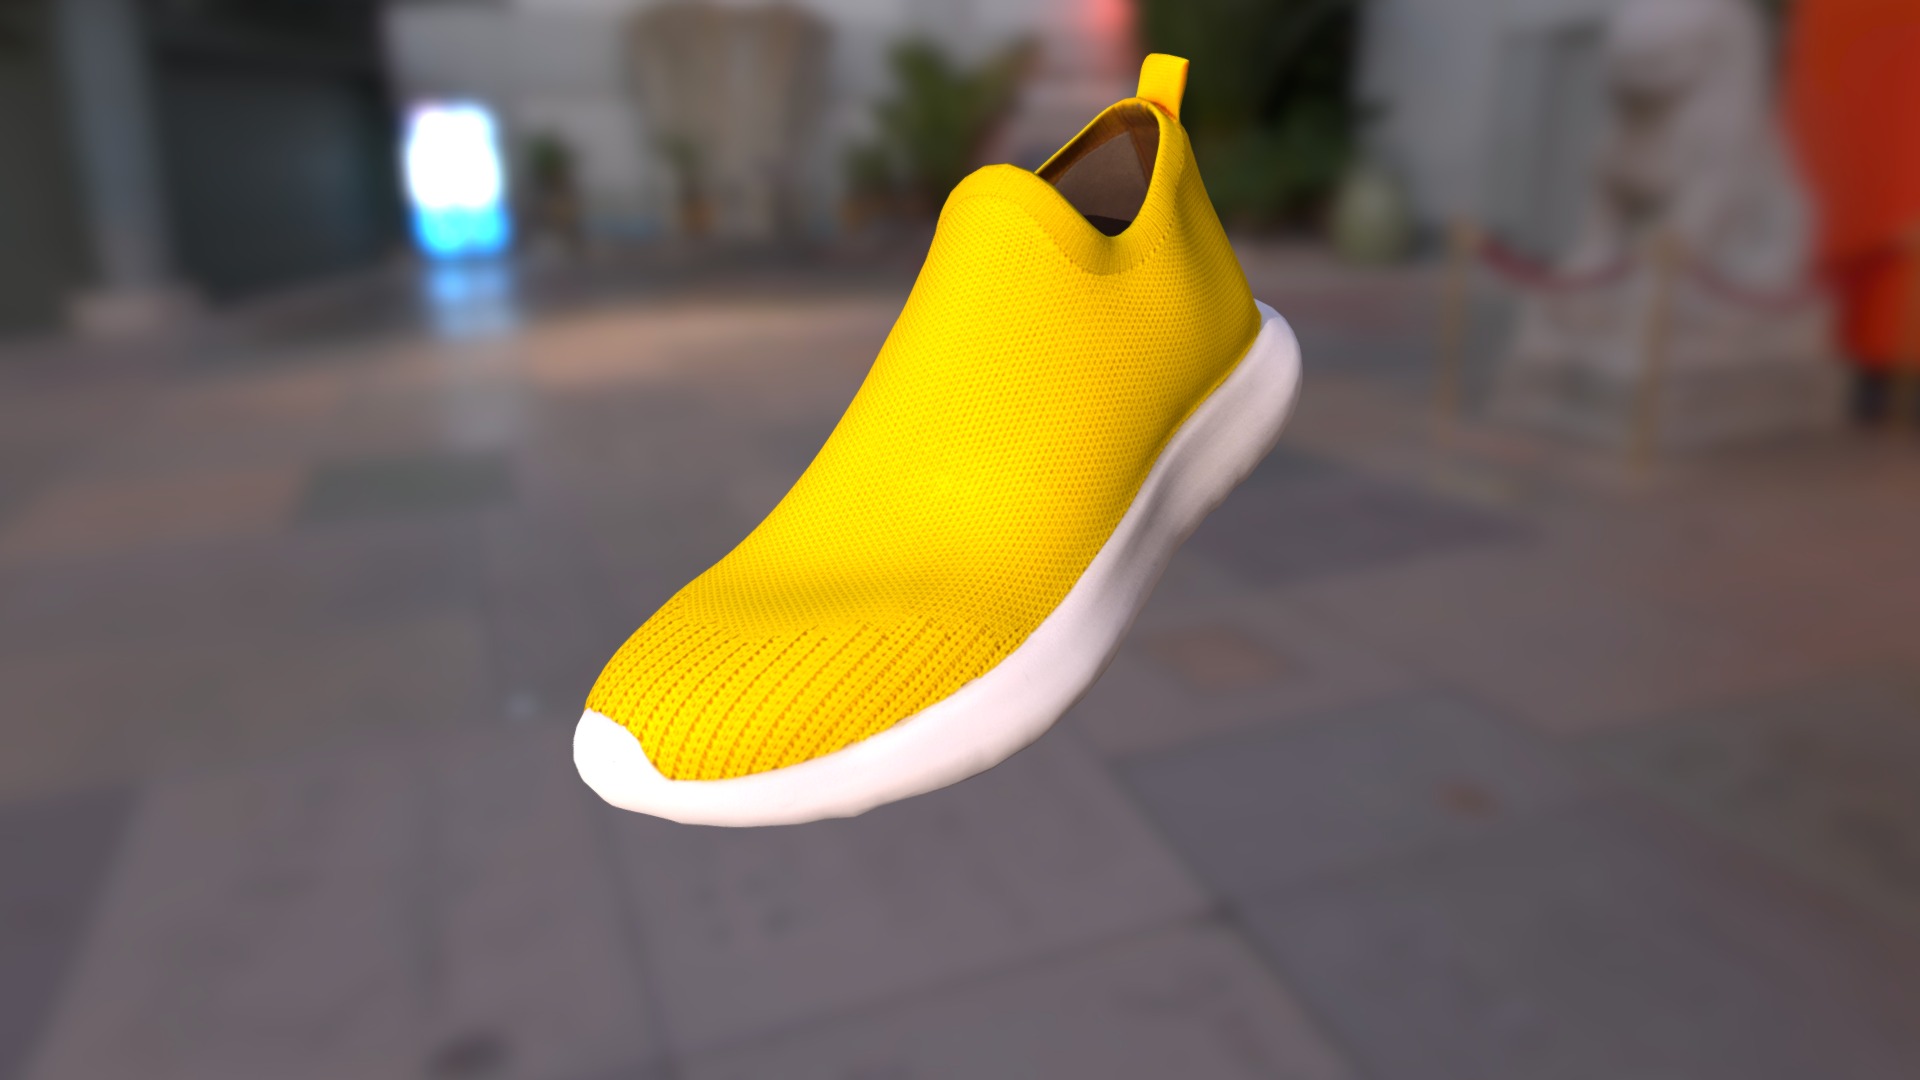 3D model A sport shoe, very fashion and comfortable - This is a 3D model of the A sport shoe, very fashion and comfortable. The 3D model is about a yellow and white ceramic shoe.